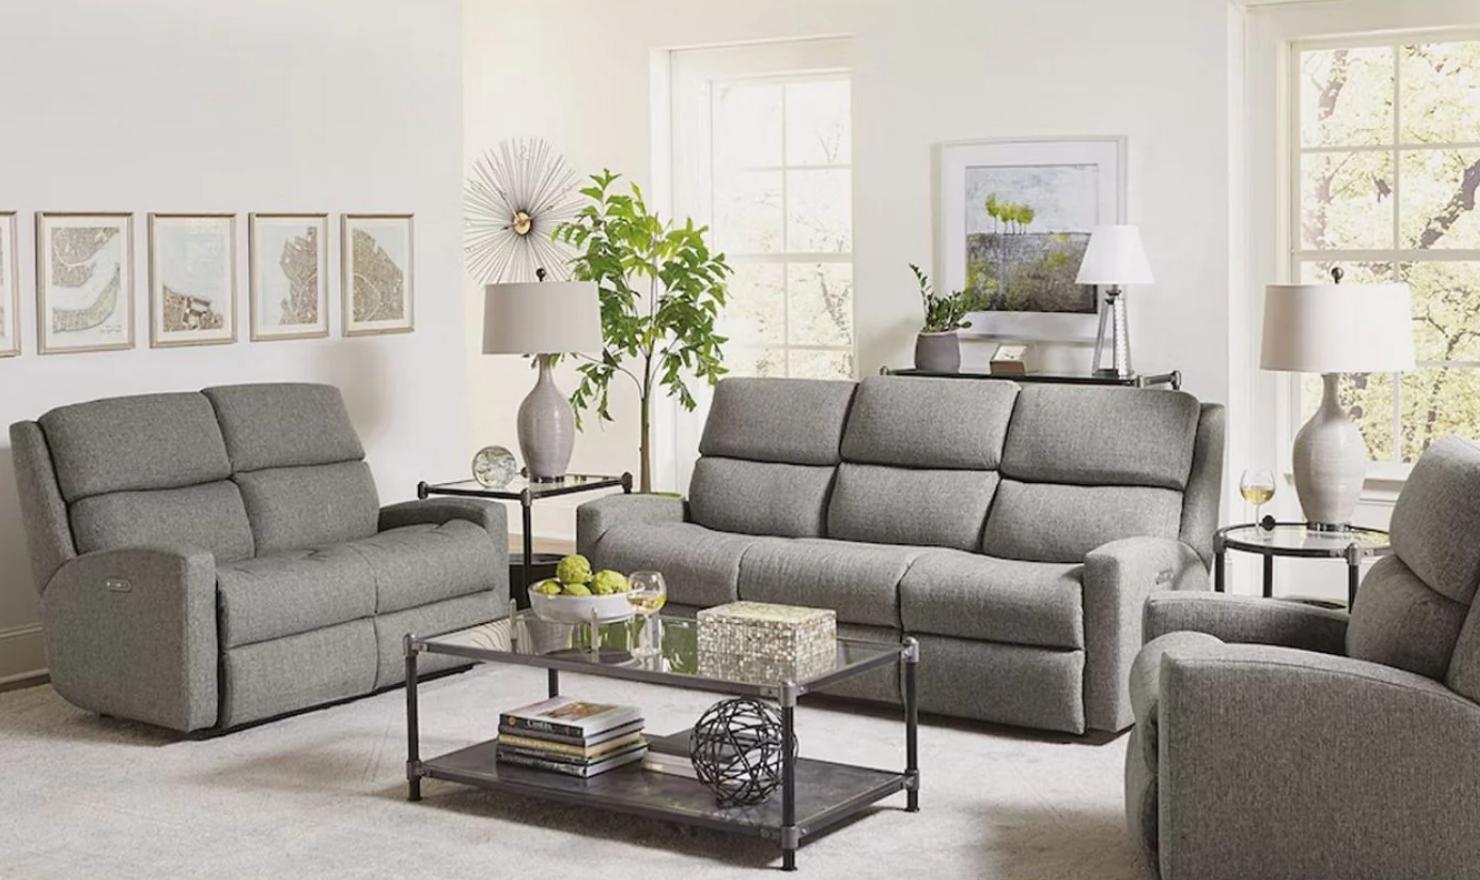 What Is a Manual Recliner Sofa